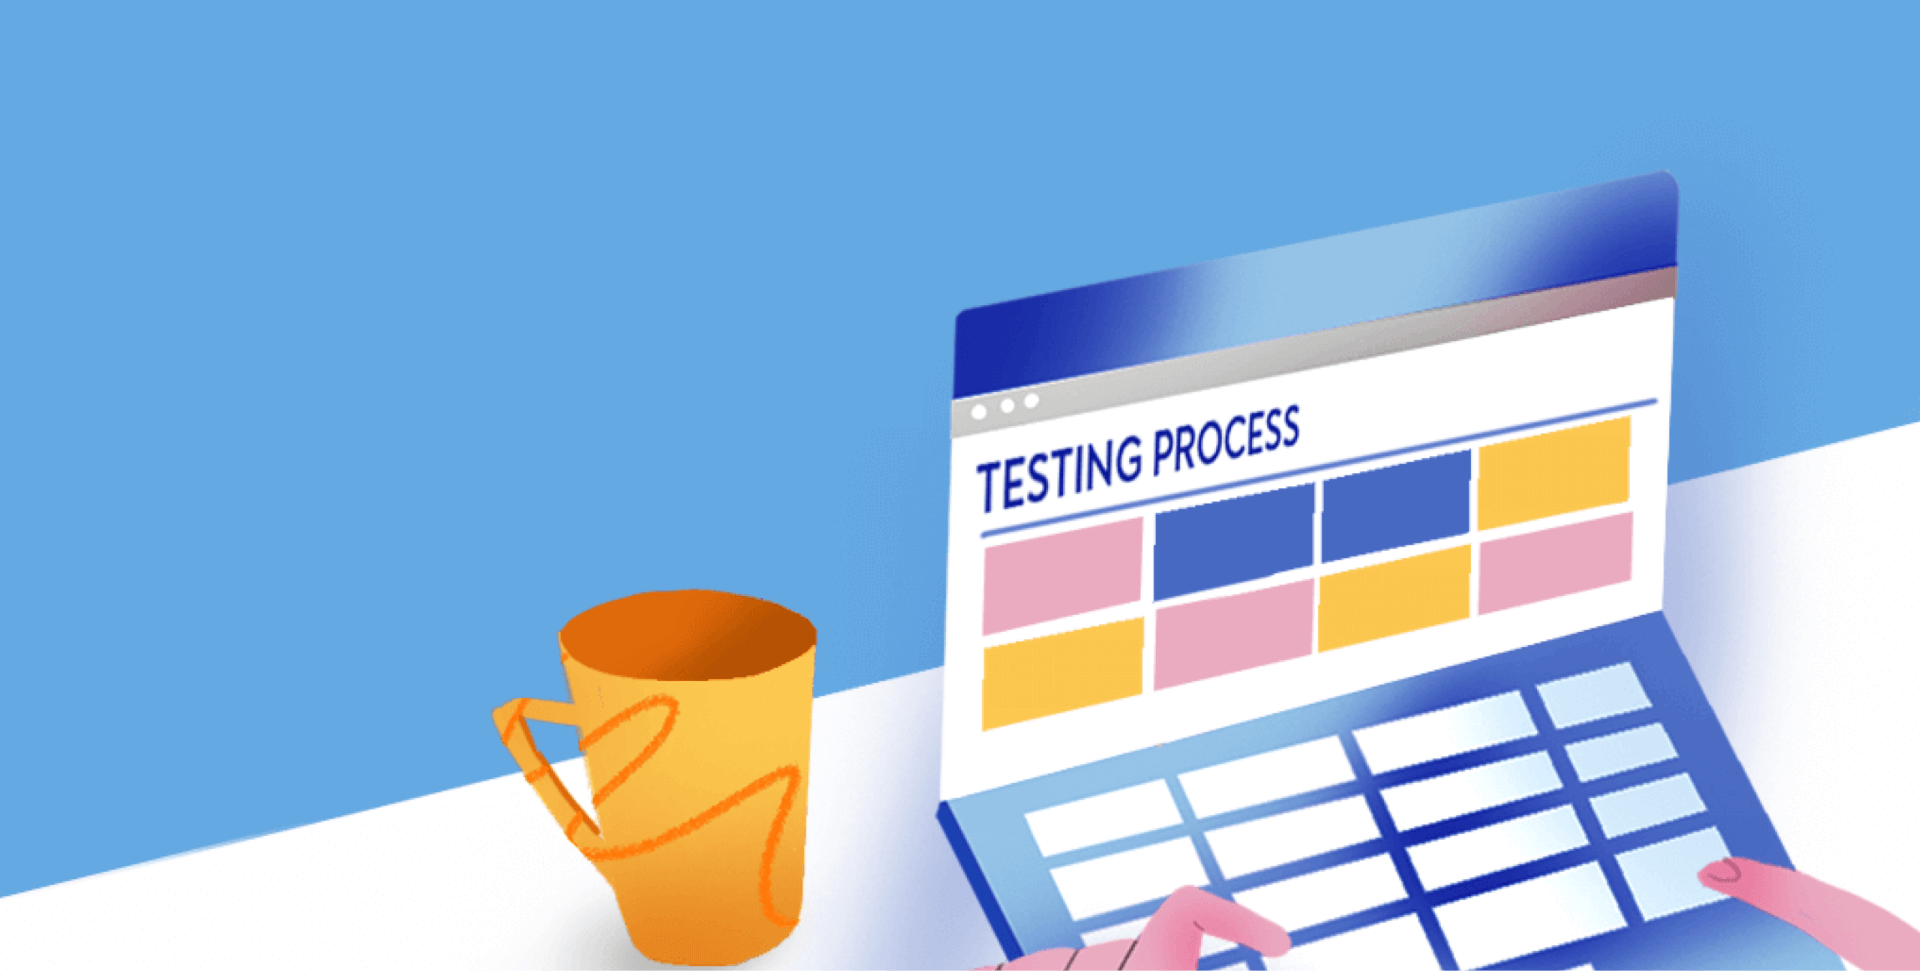 7 secrets to managing your testing process